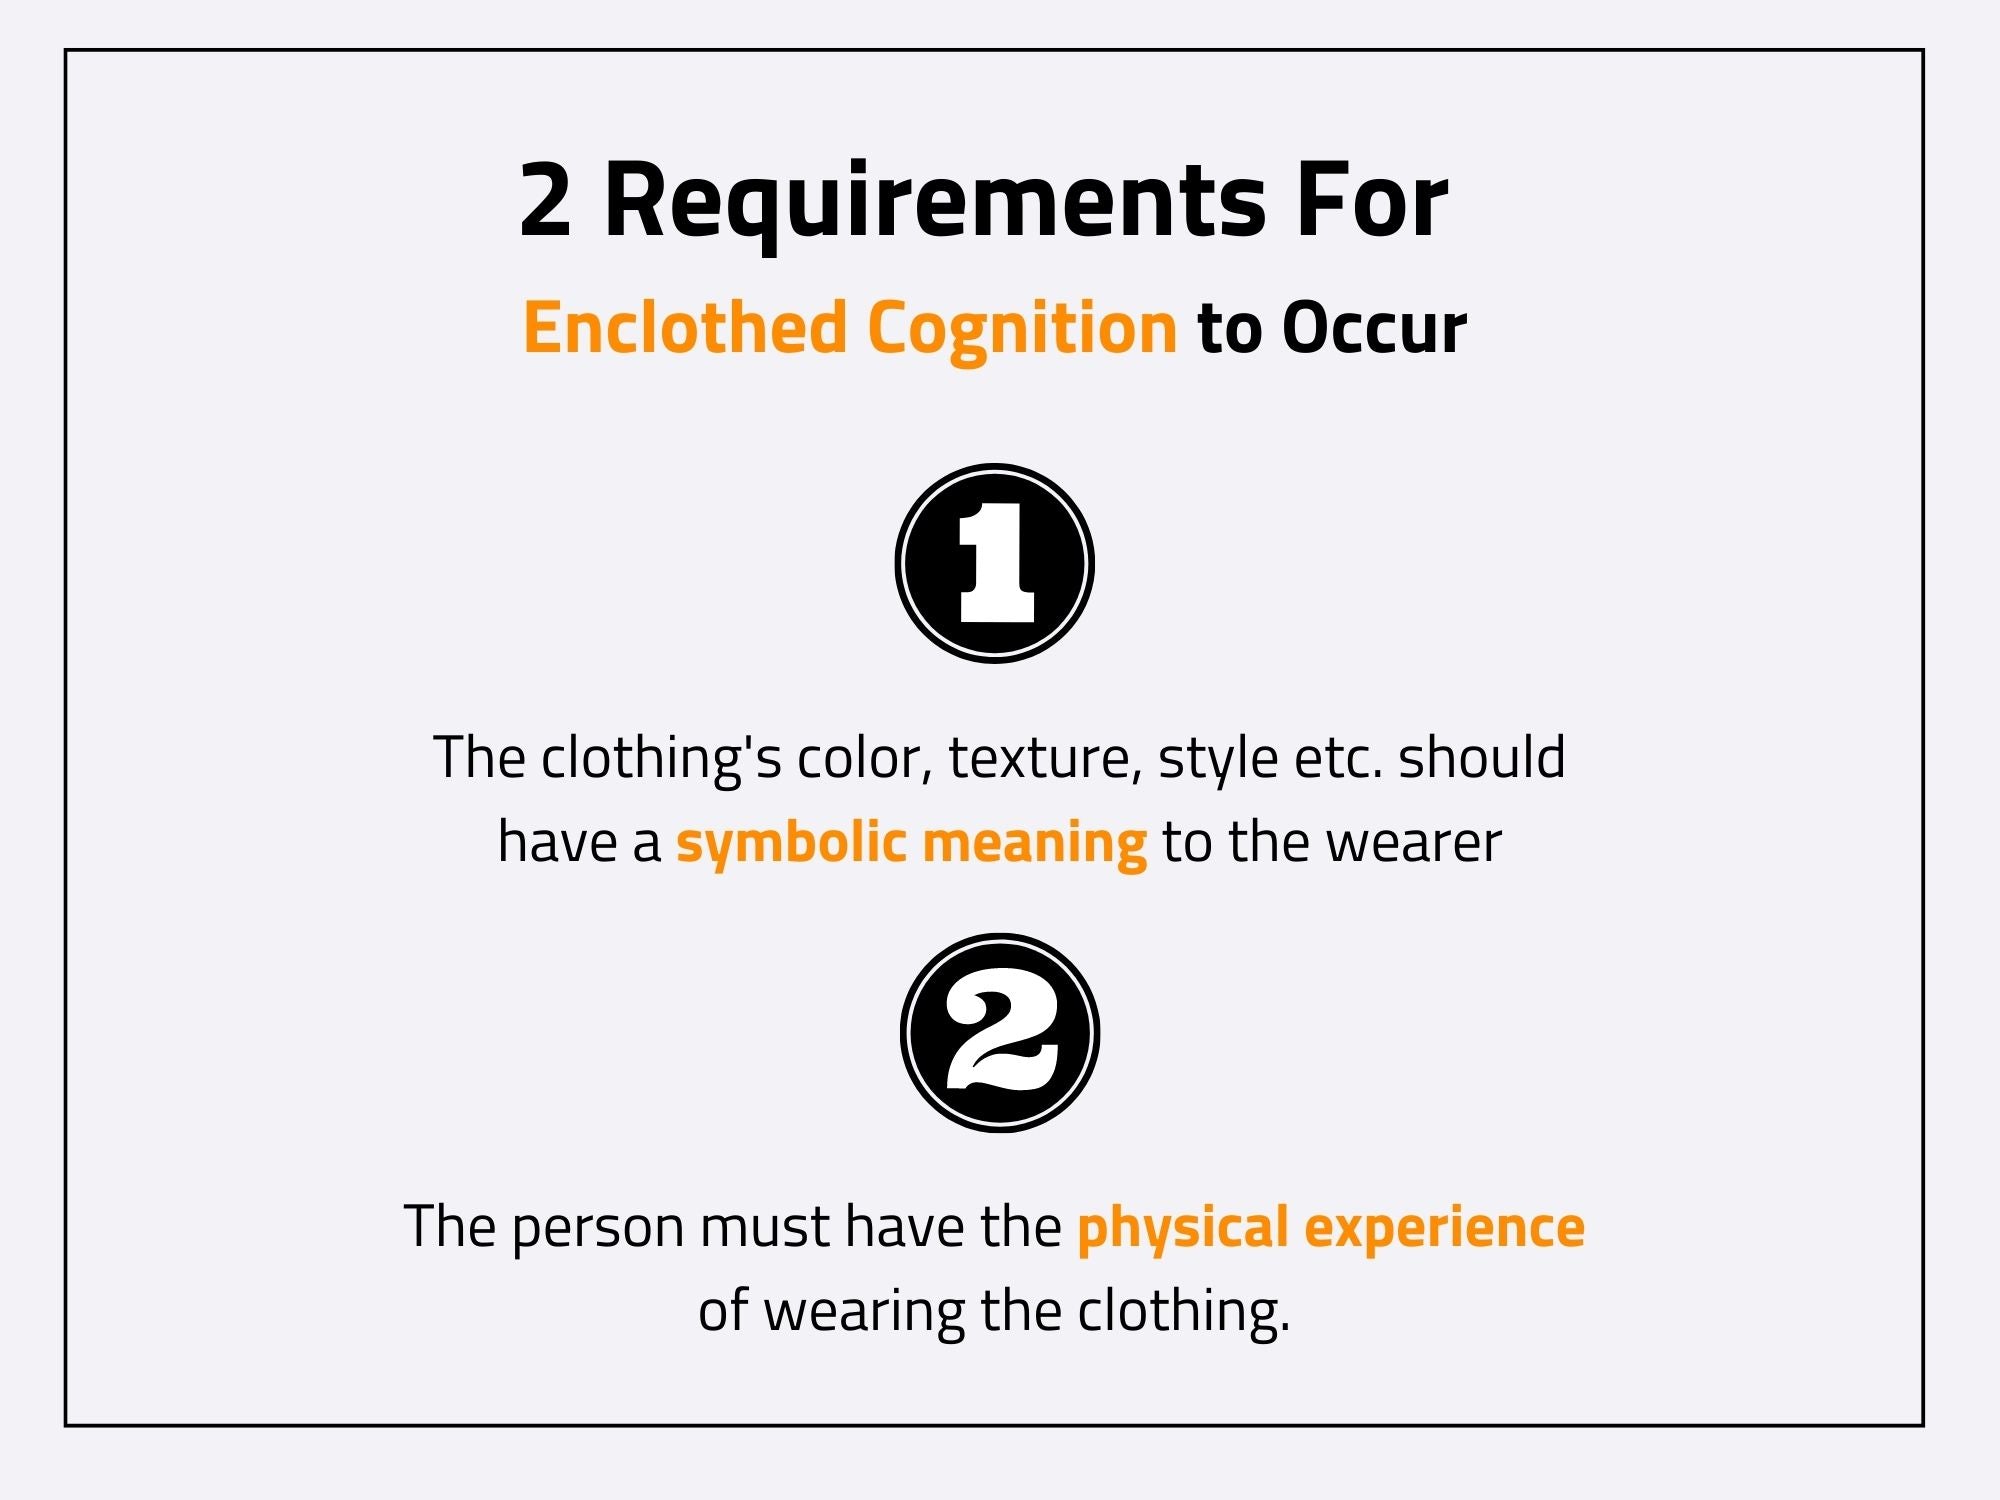 What two things must be true for enclothed cognition to occur?